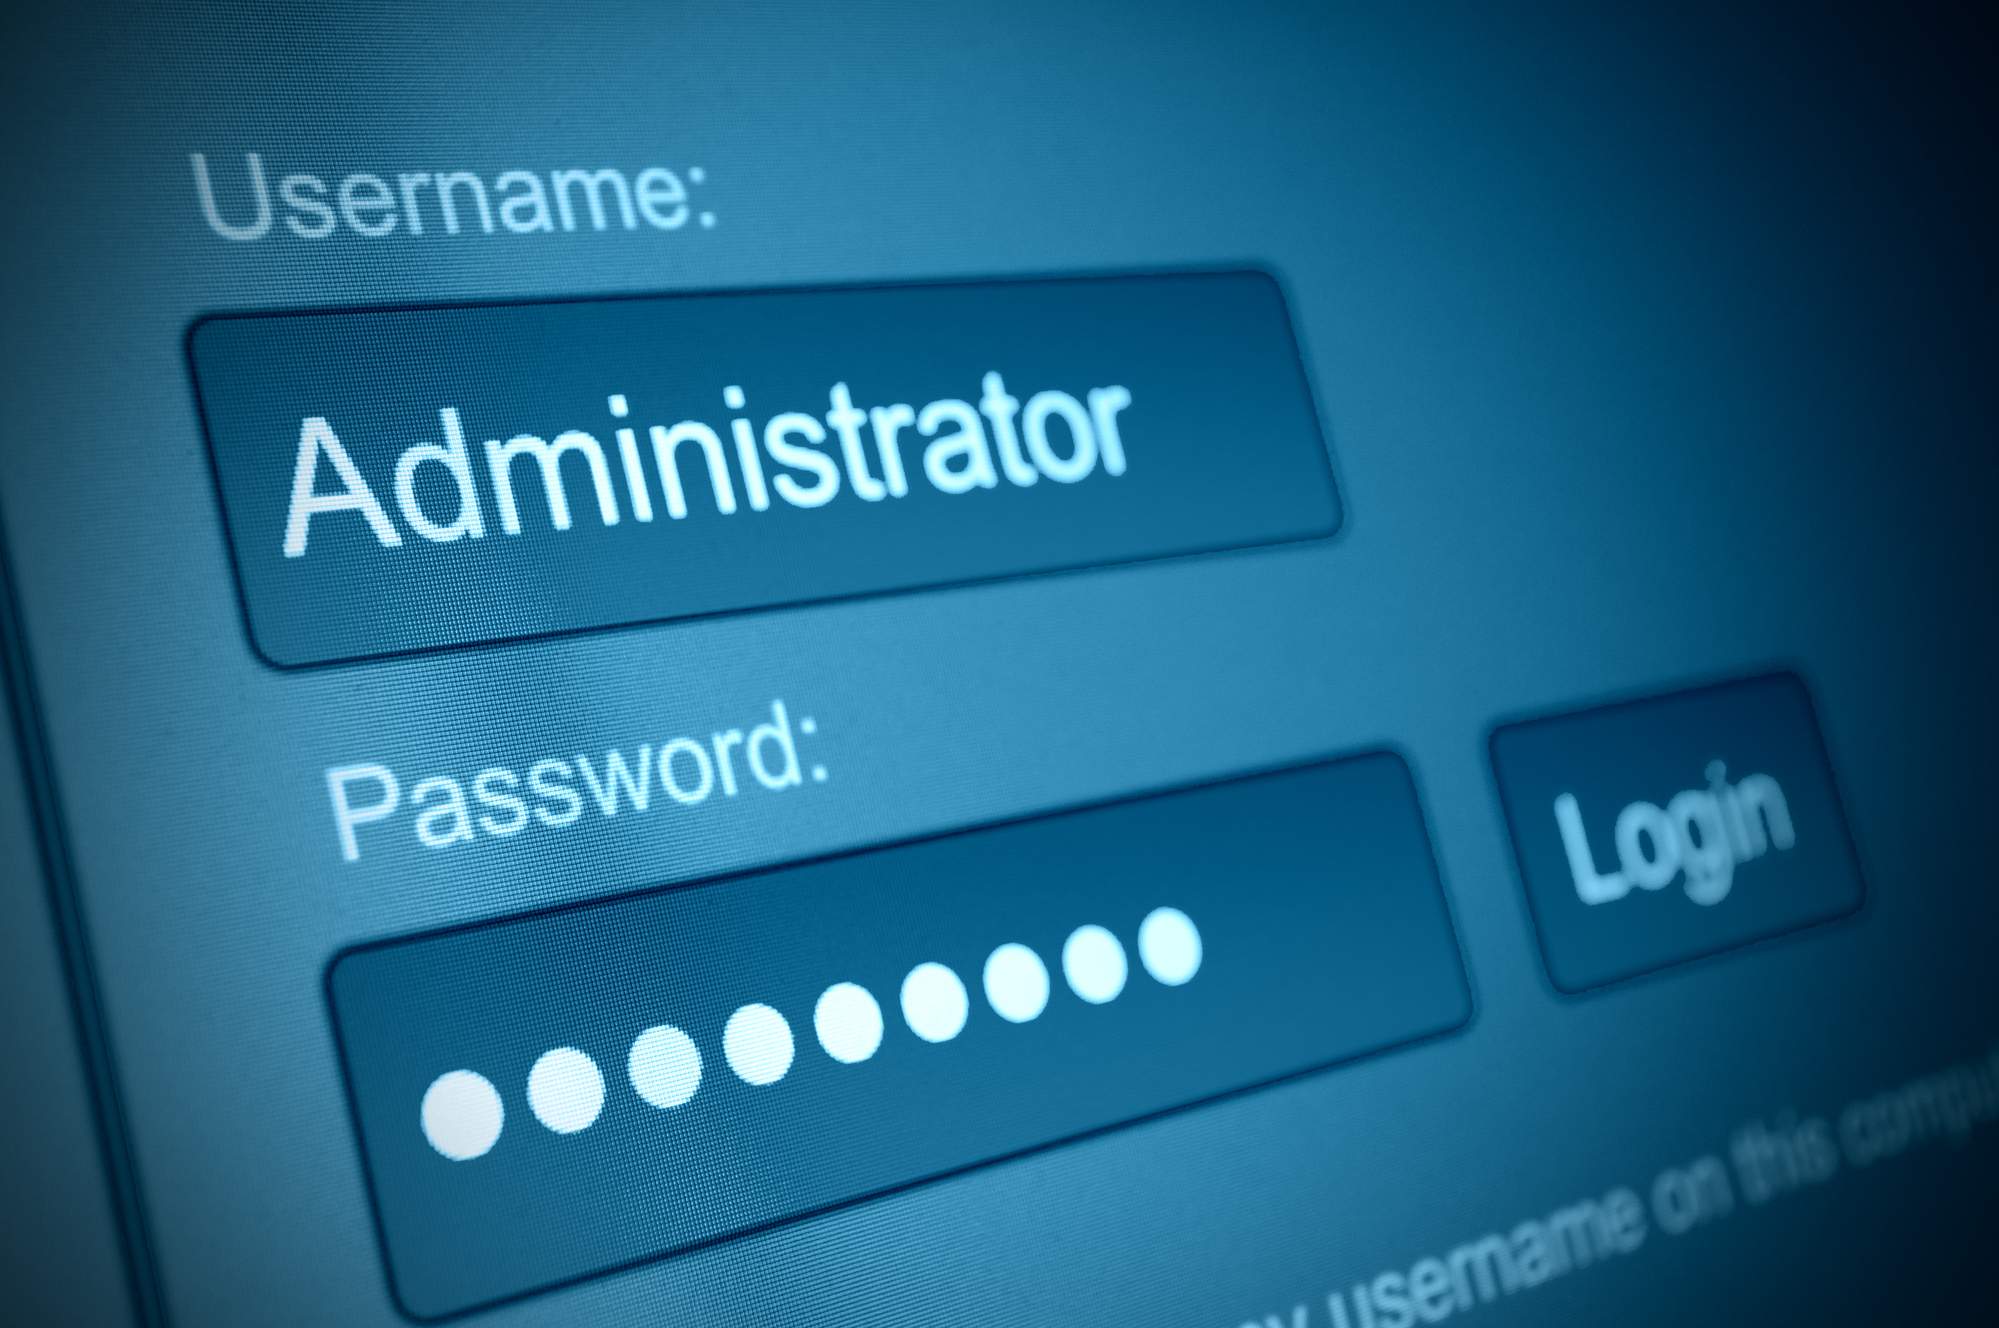 Administrator level login and password screen